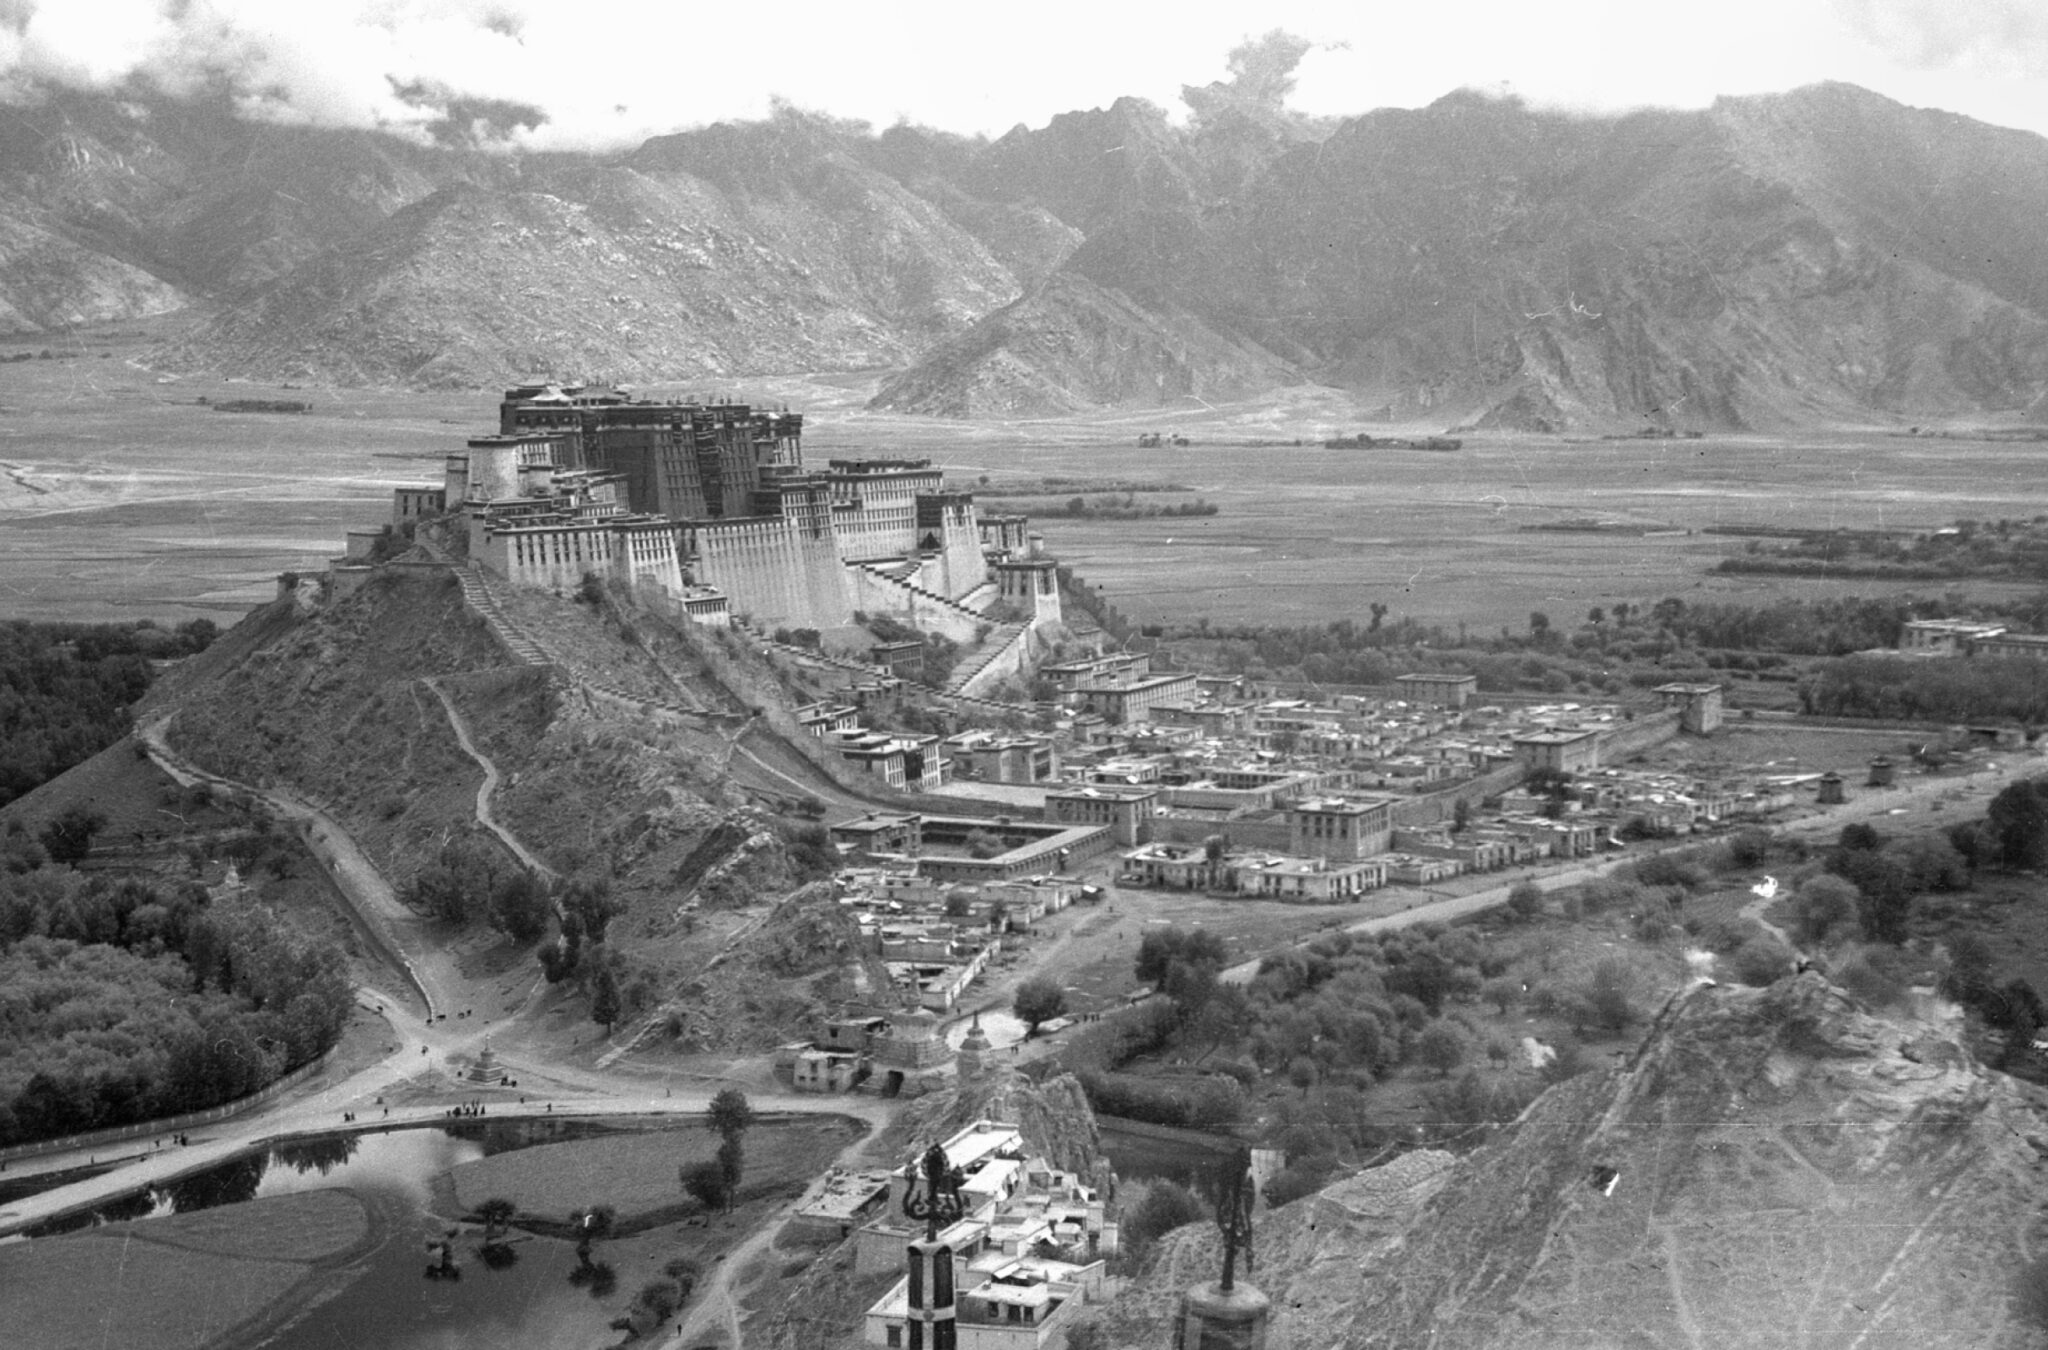 Black and white aerial photograph of palace complex situated on peak of hill within mountain valley